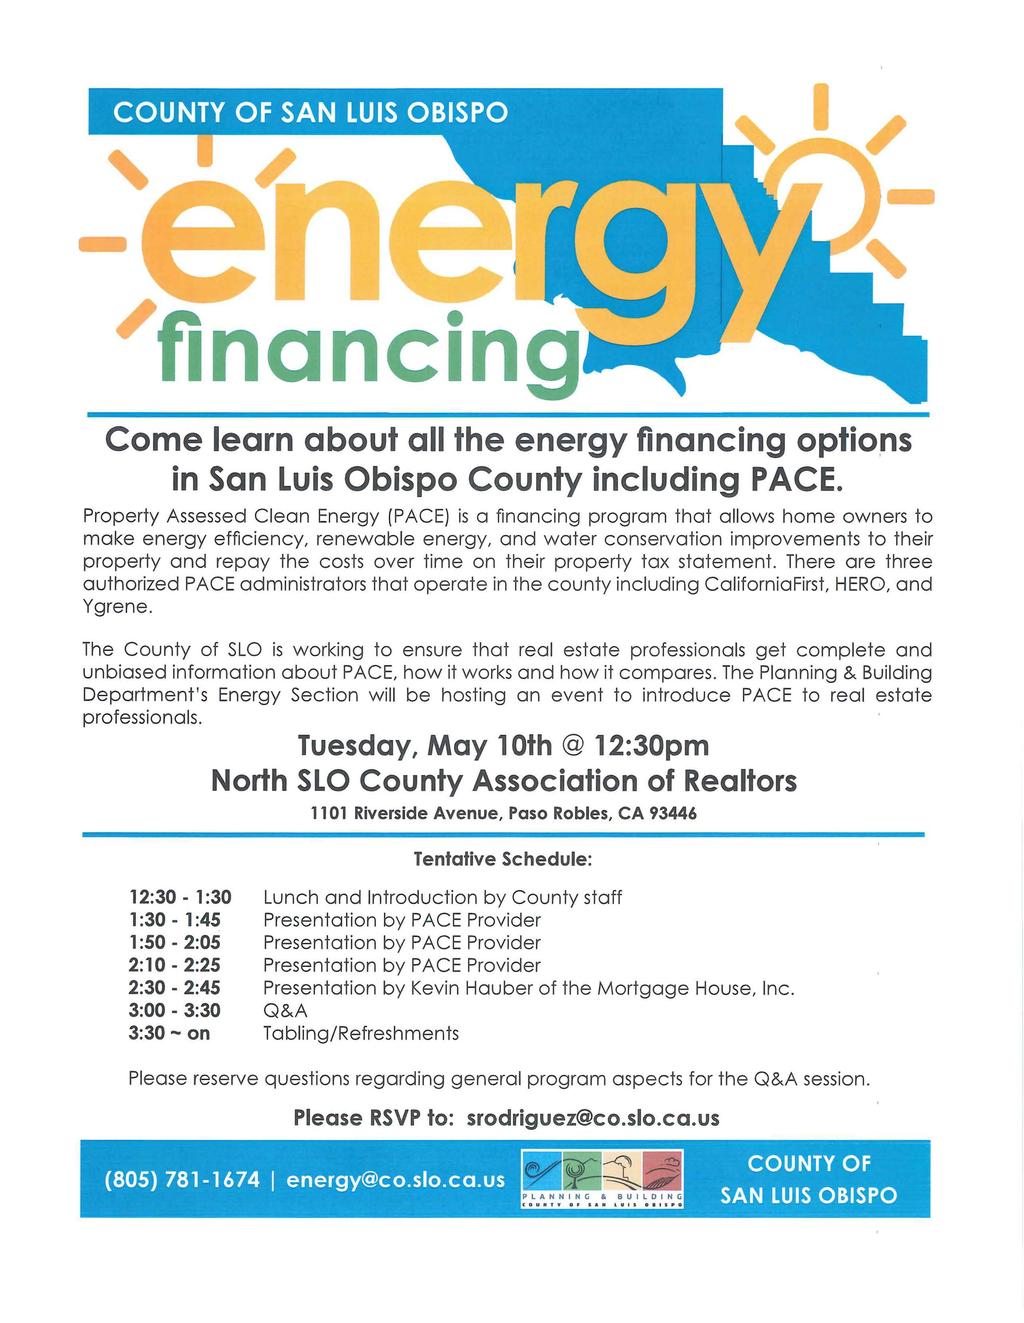 - ' financing Come learn about all the energy financing optio,ns in San Luis Obispo County including PACE.